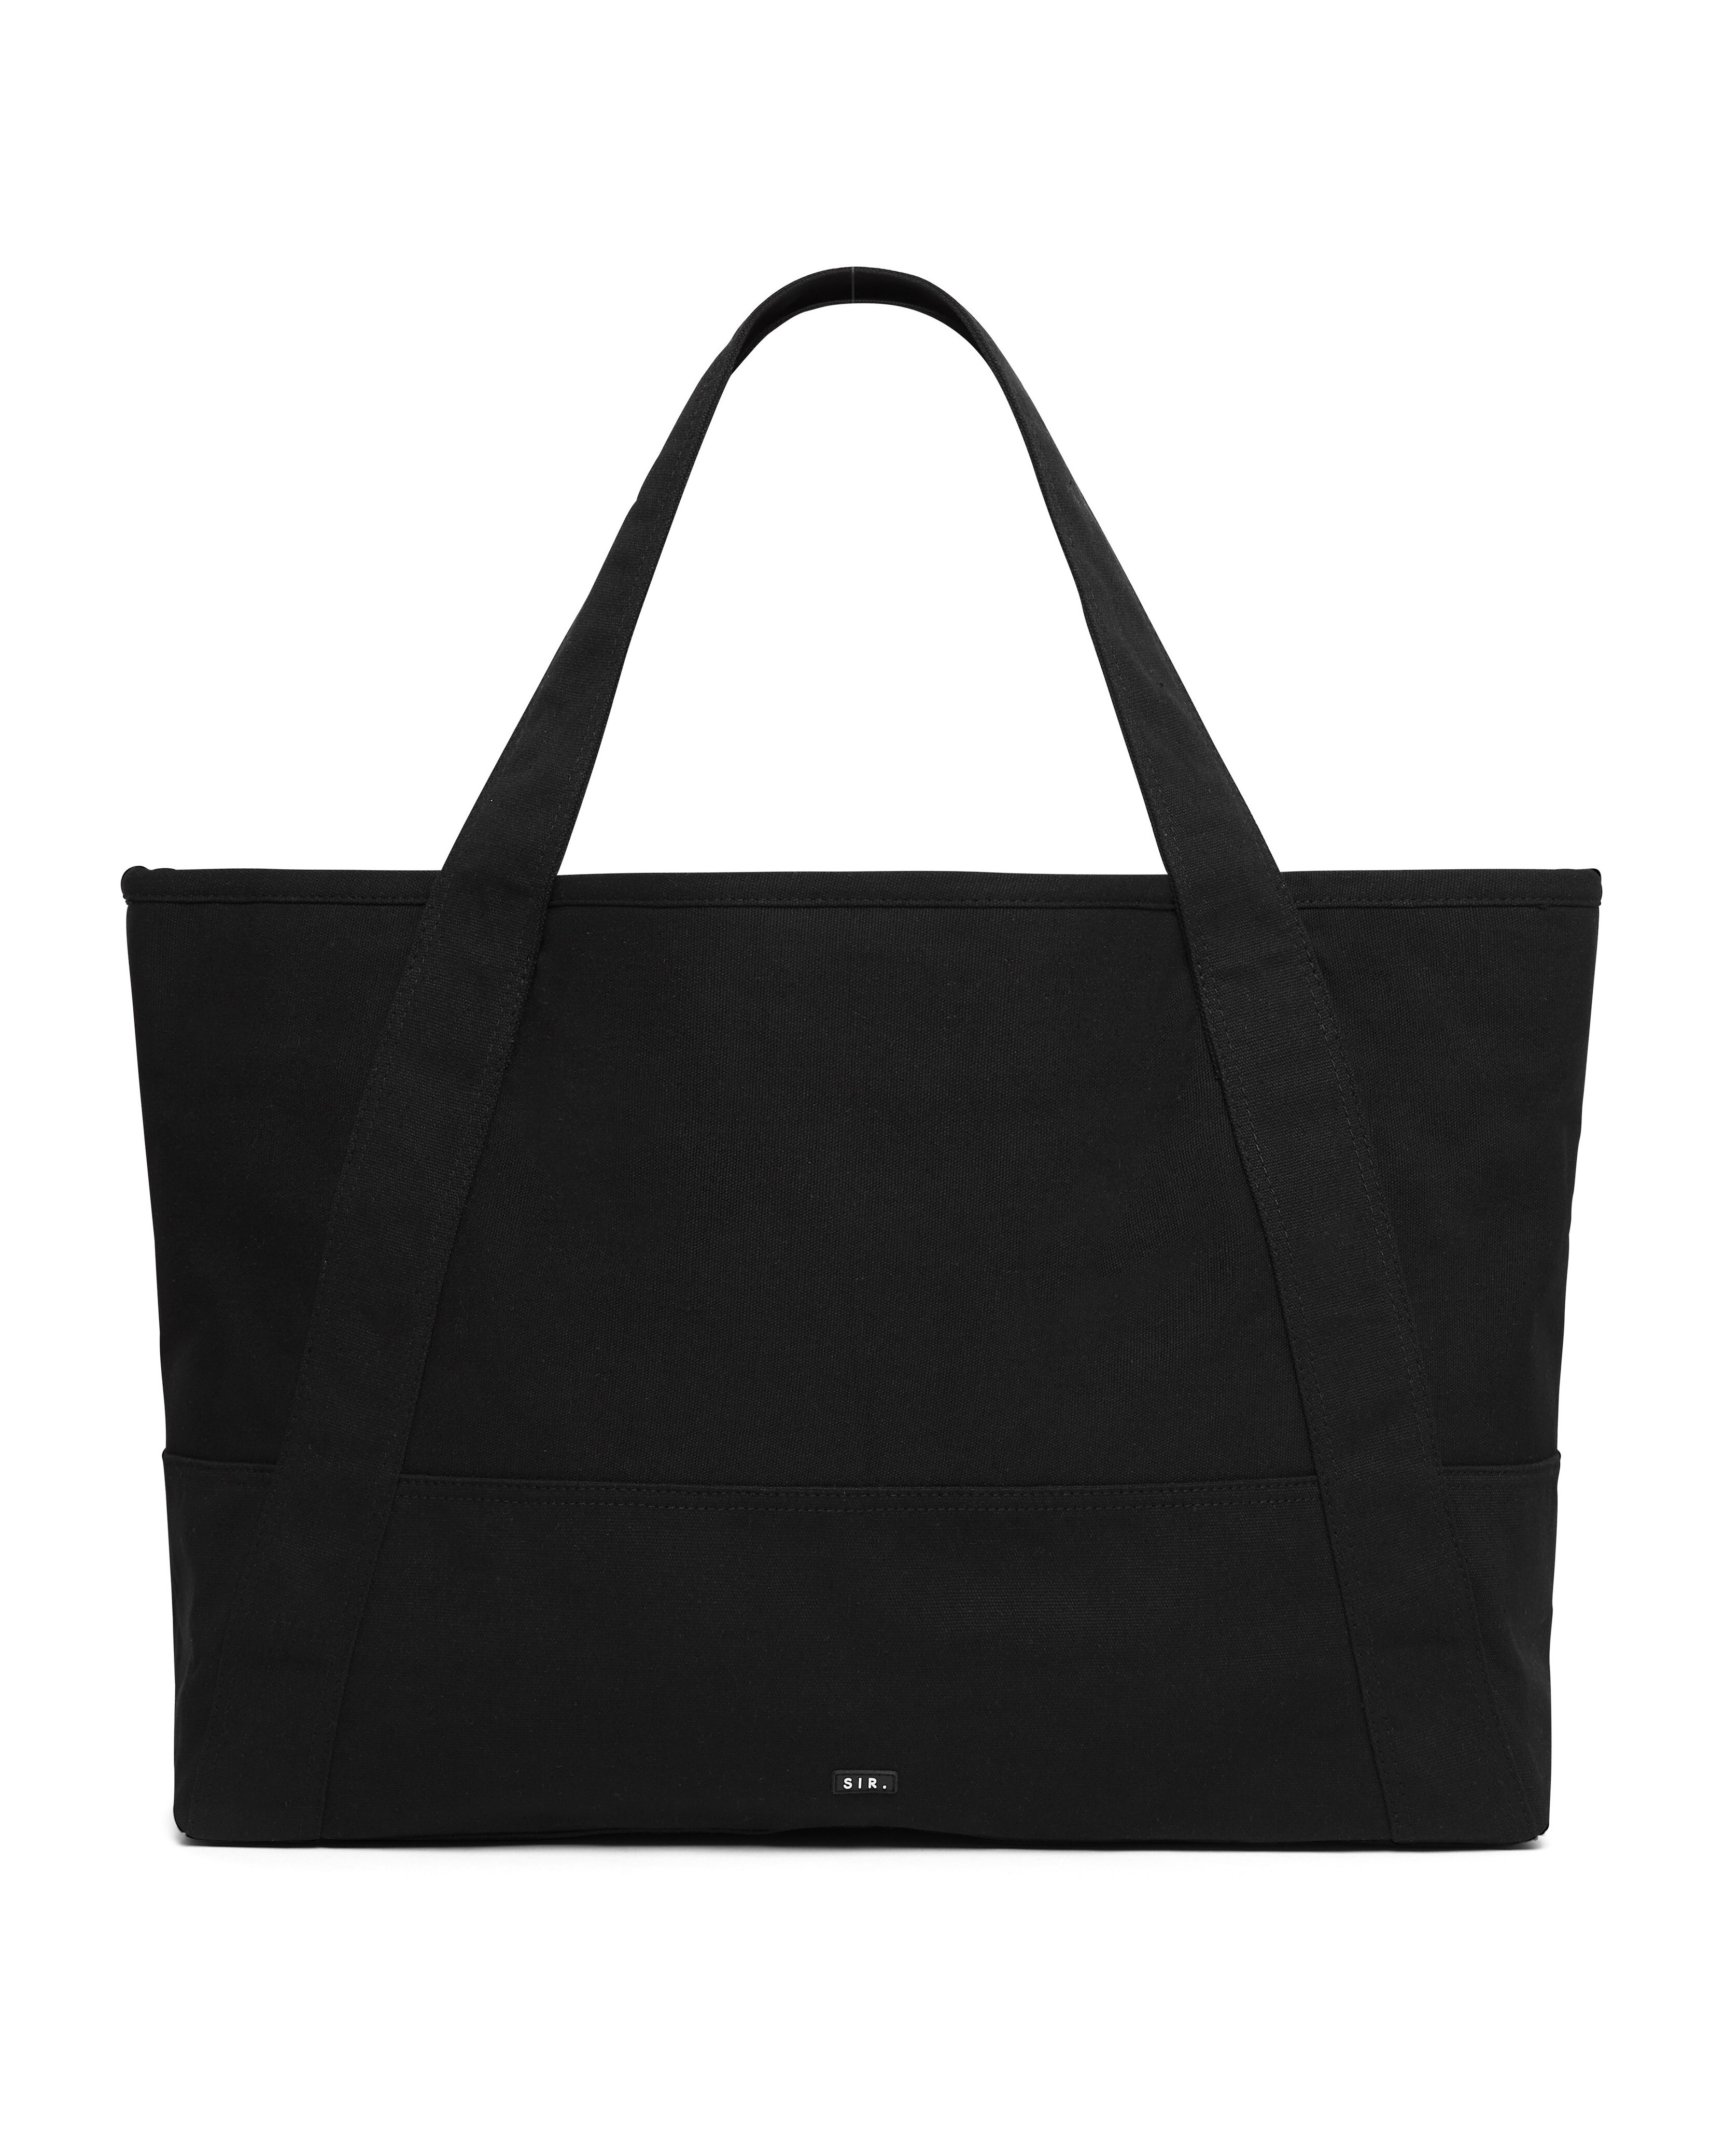 MAURICE TOTE BAG (BLACK)- SIR SUMMER 21 Boxing Day Sale